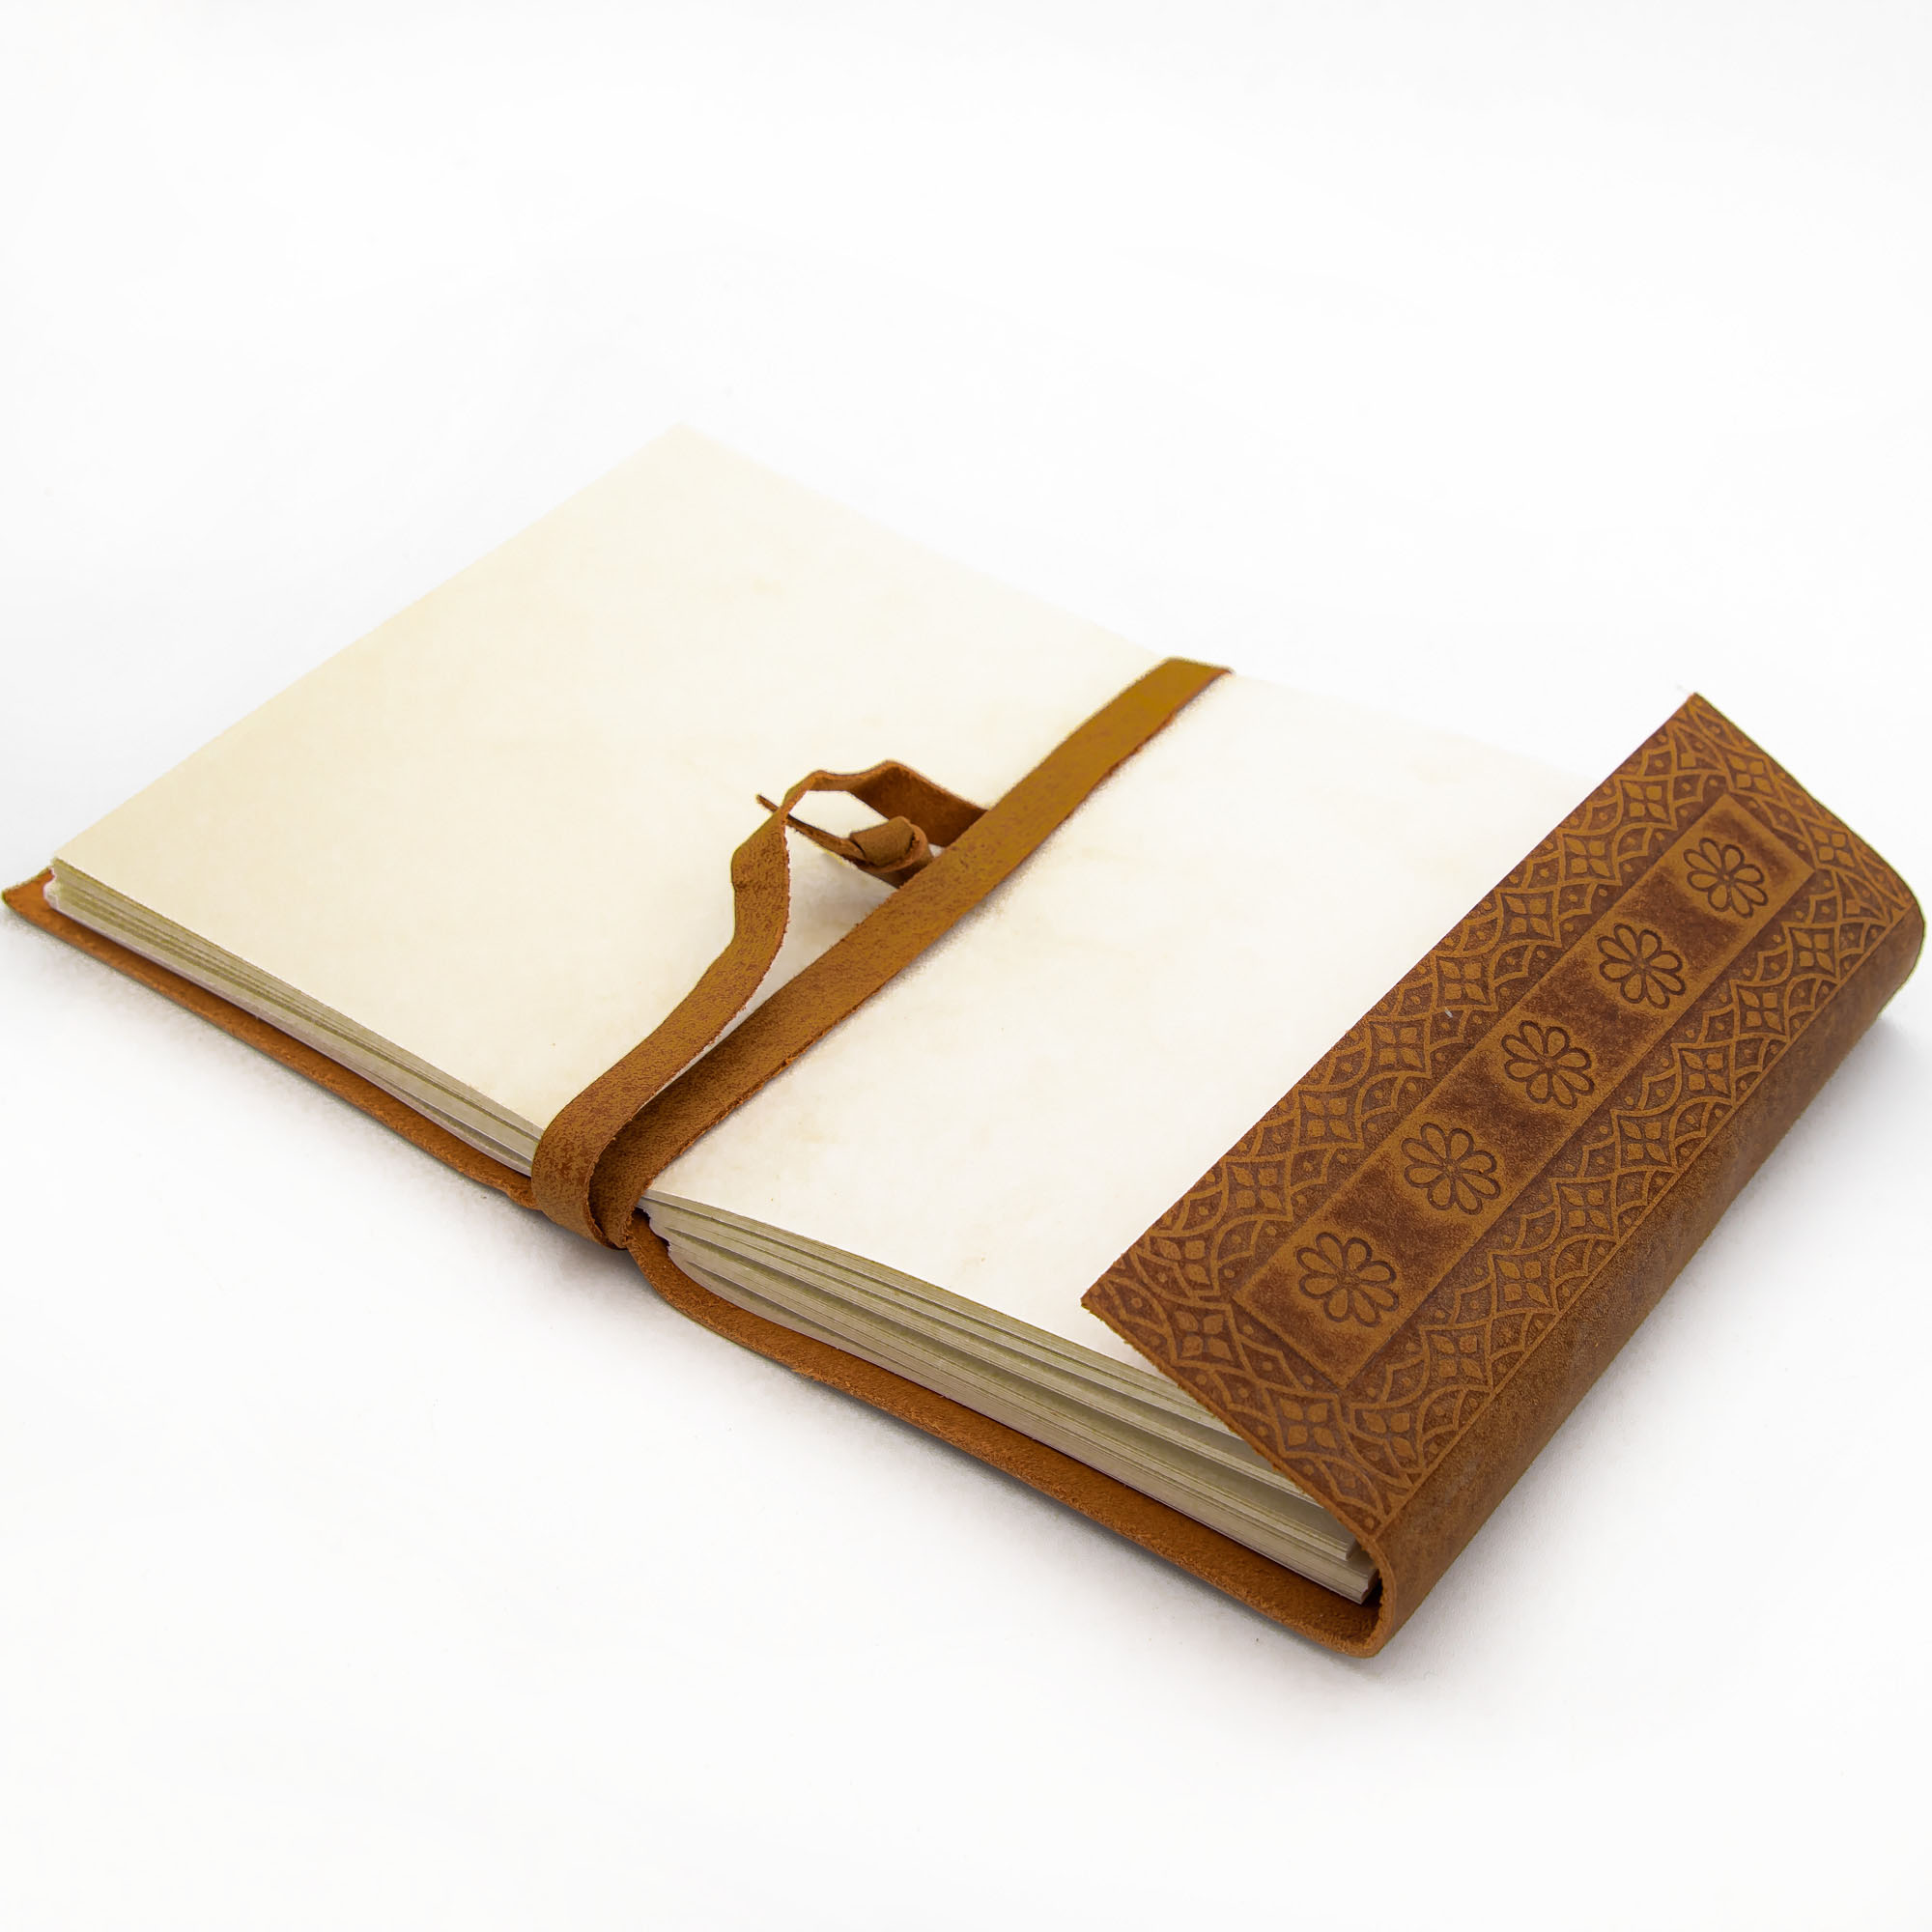 Old-fashioned Cursive Embossed Leather-Bound Journal Choice of Design